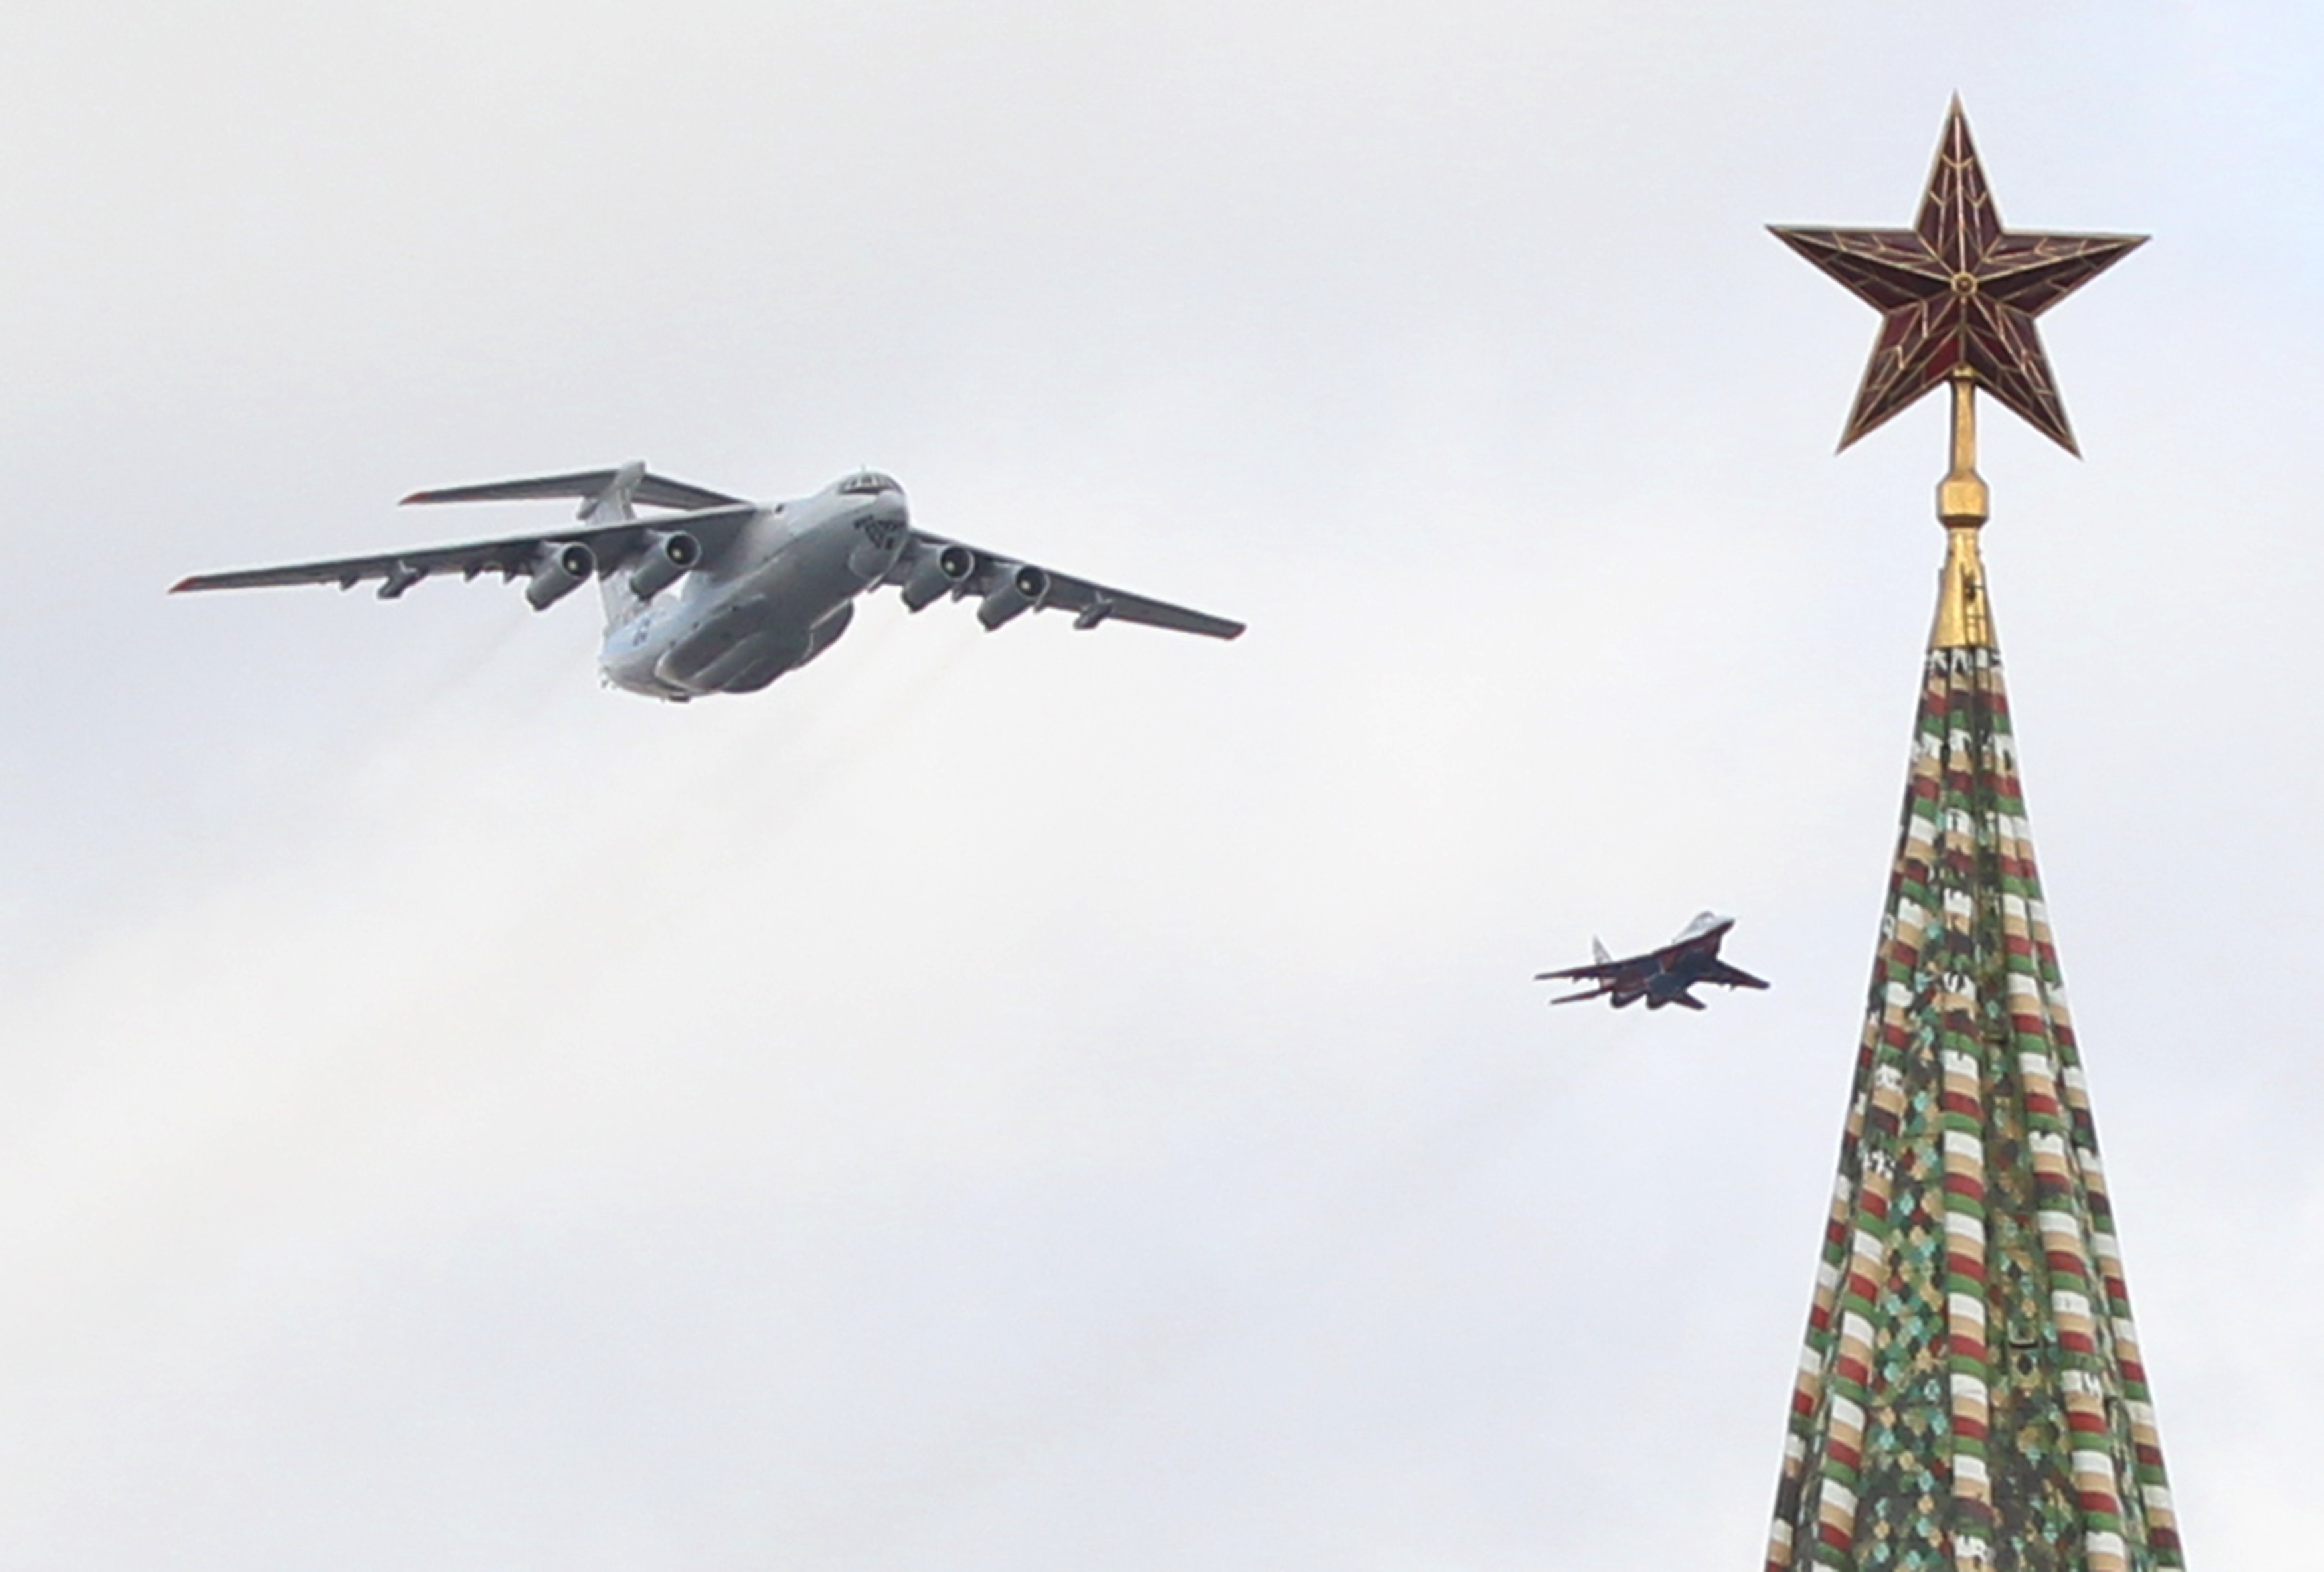 Russia Plans to Send Message by Flying Nuclear ‘Doomsday’ Plane at Parade – Newsweek